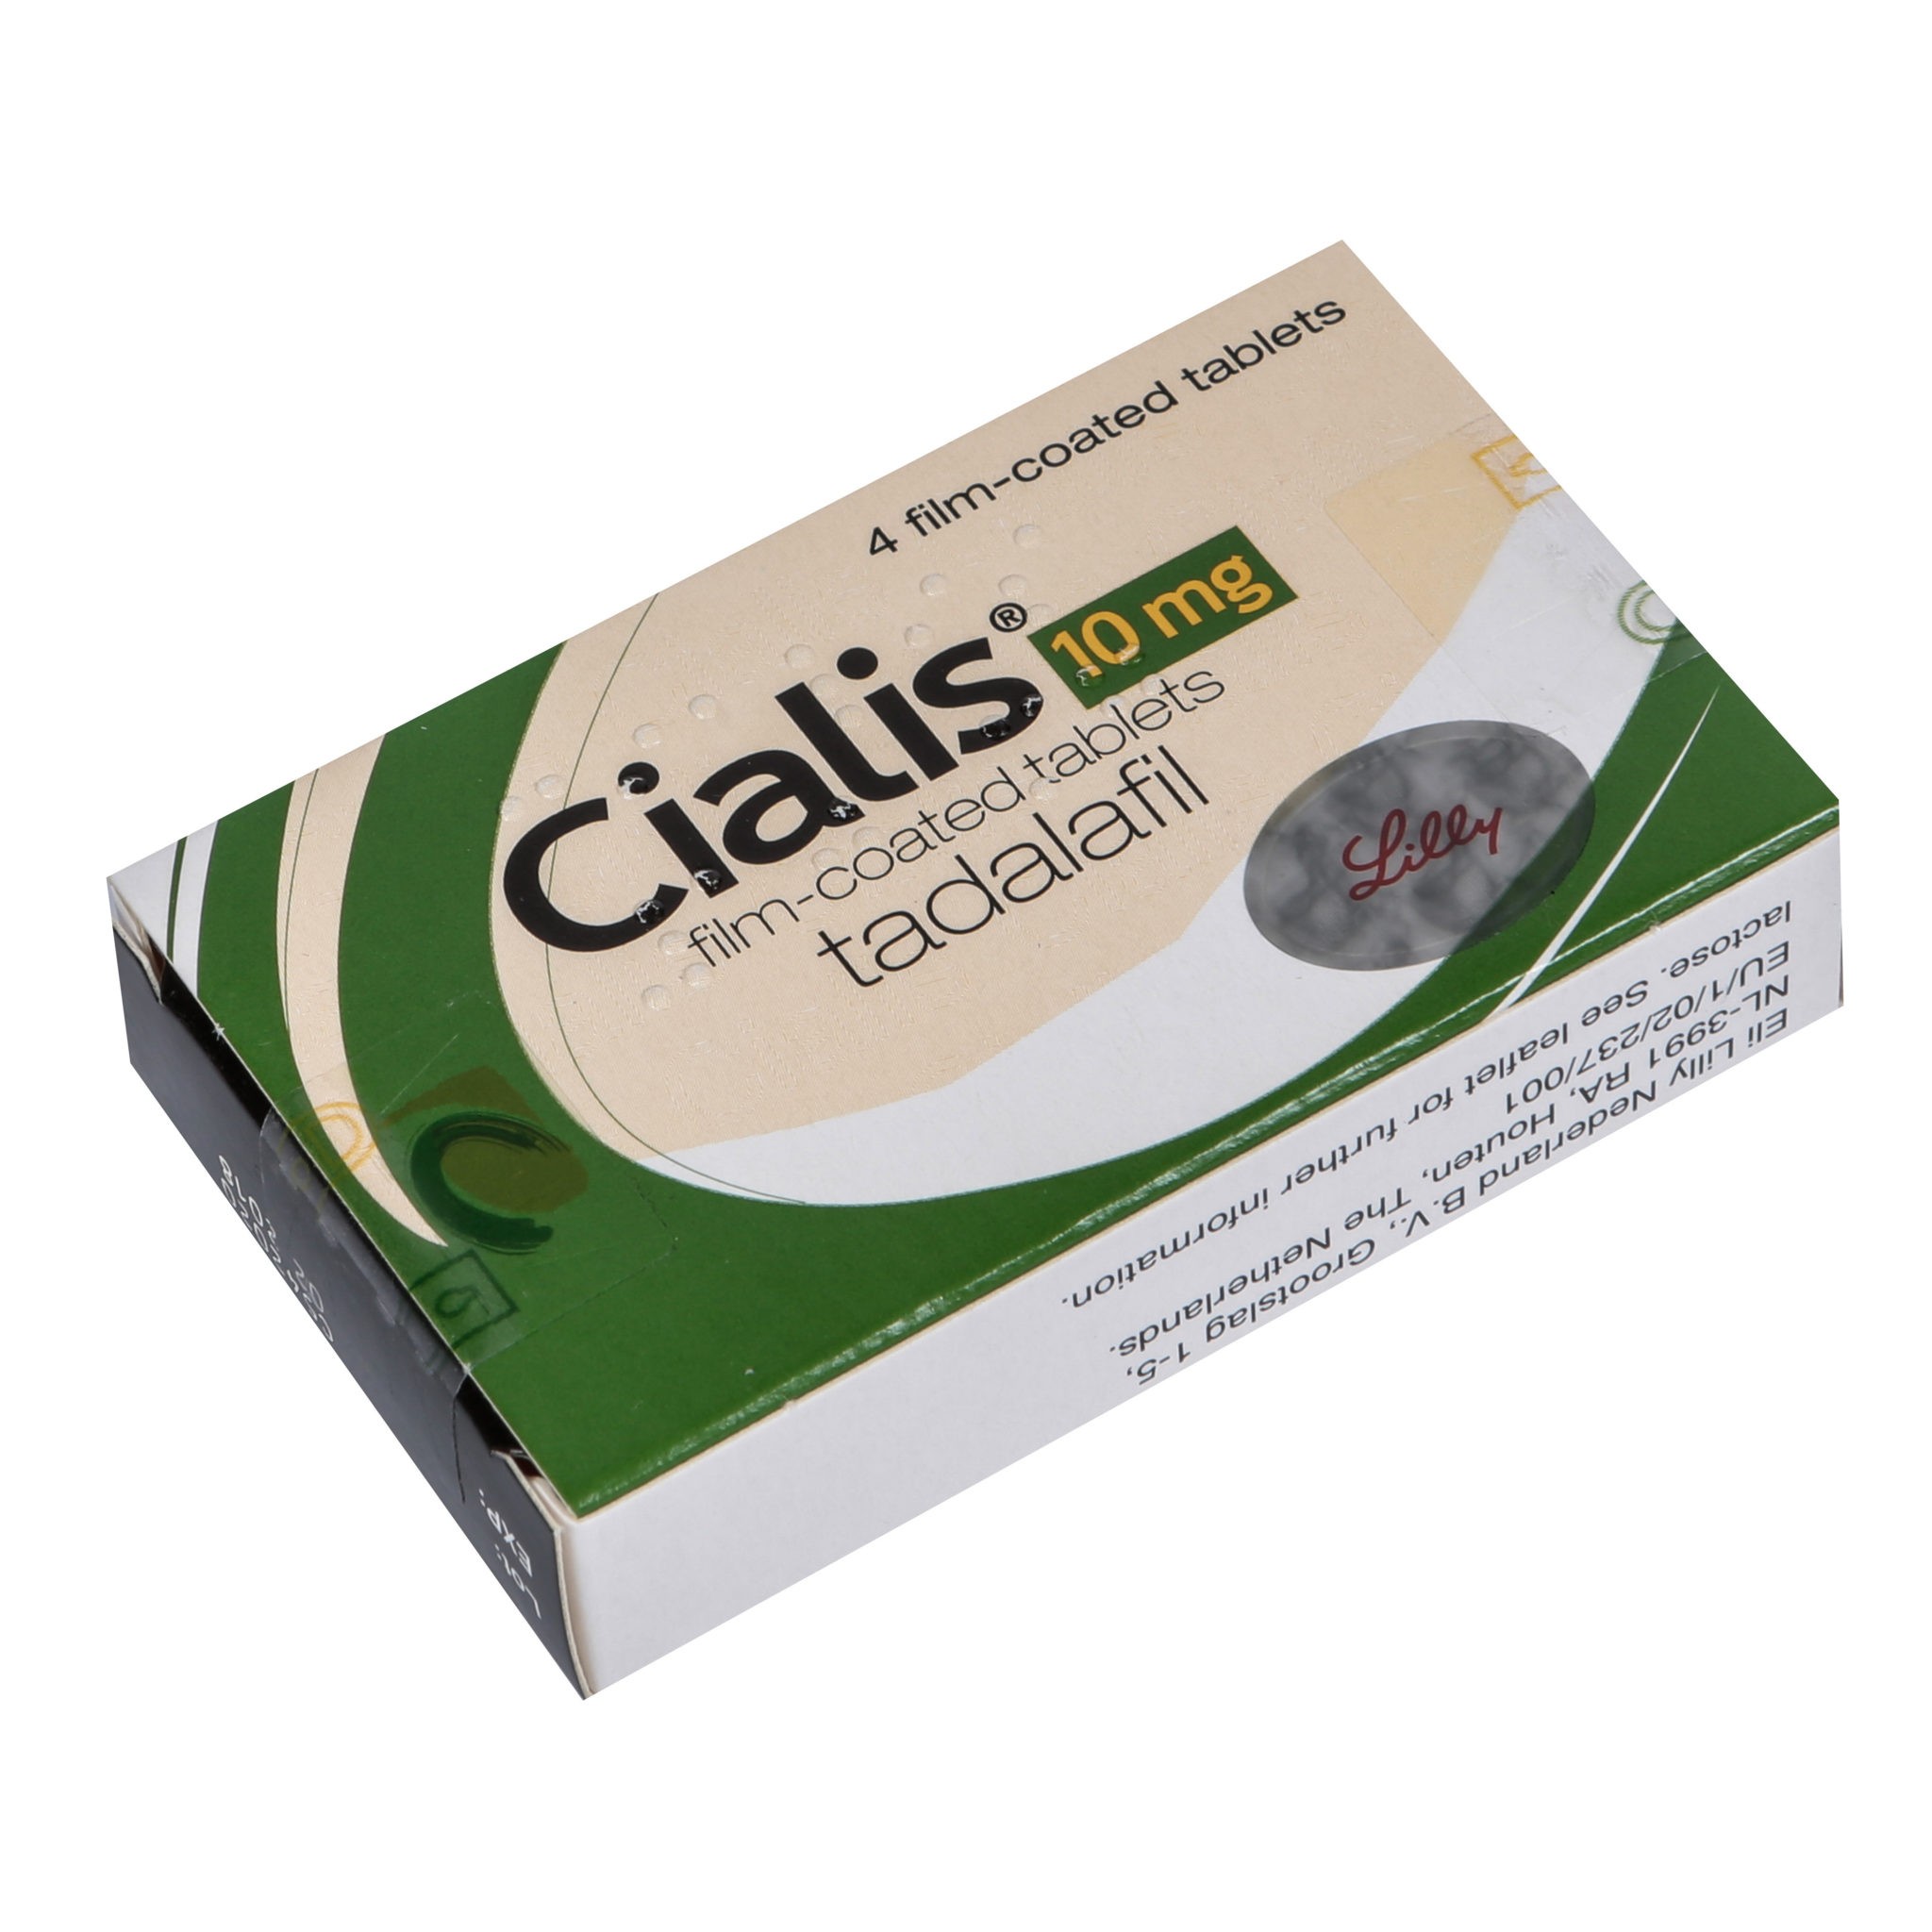 Cialis 10mg Tablets (32 Tablets)